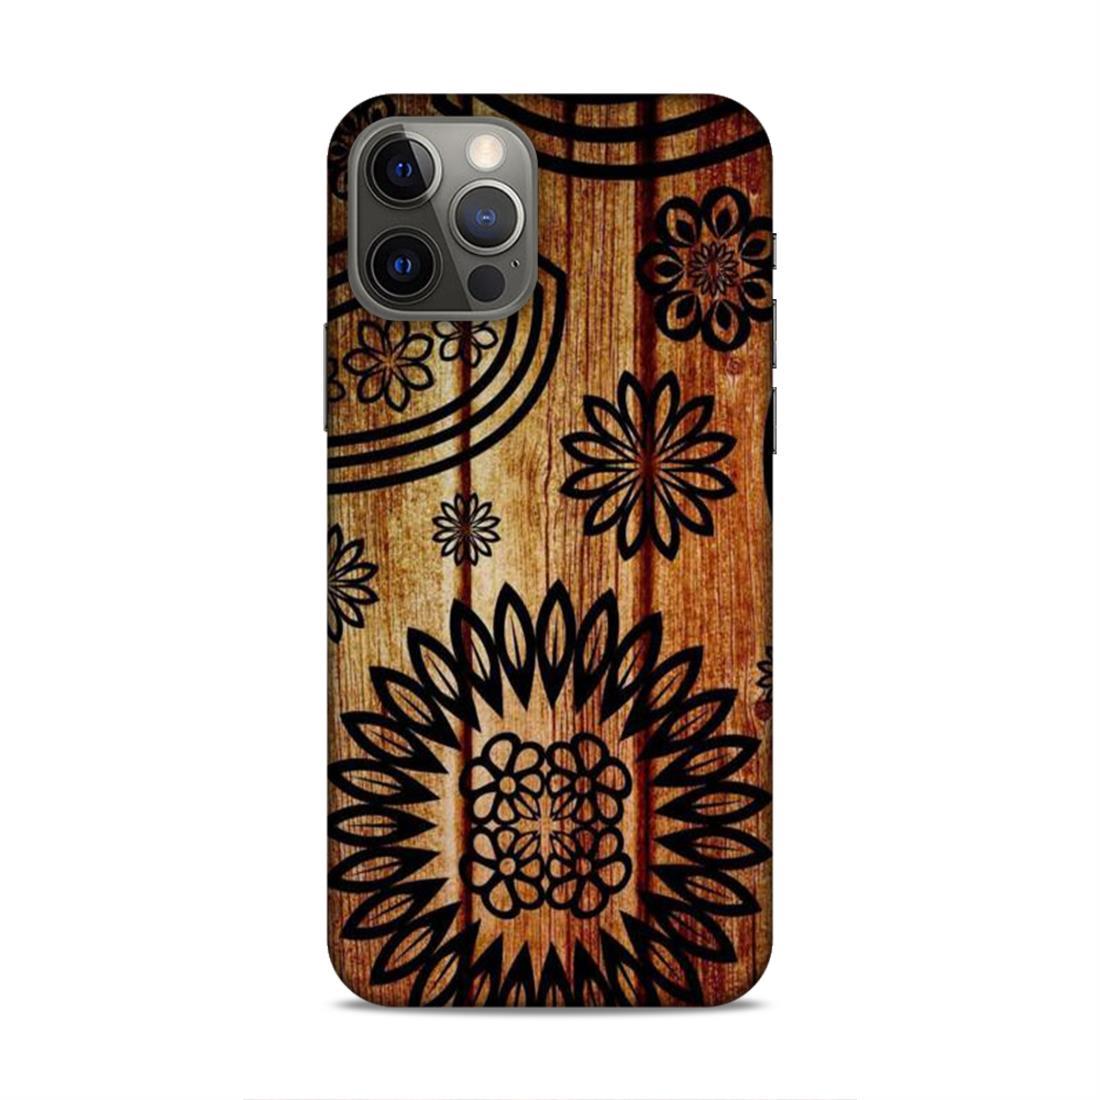 Wooden Look Pattern iPhone 12 Pro Mobile Case Cover